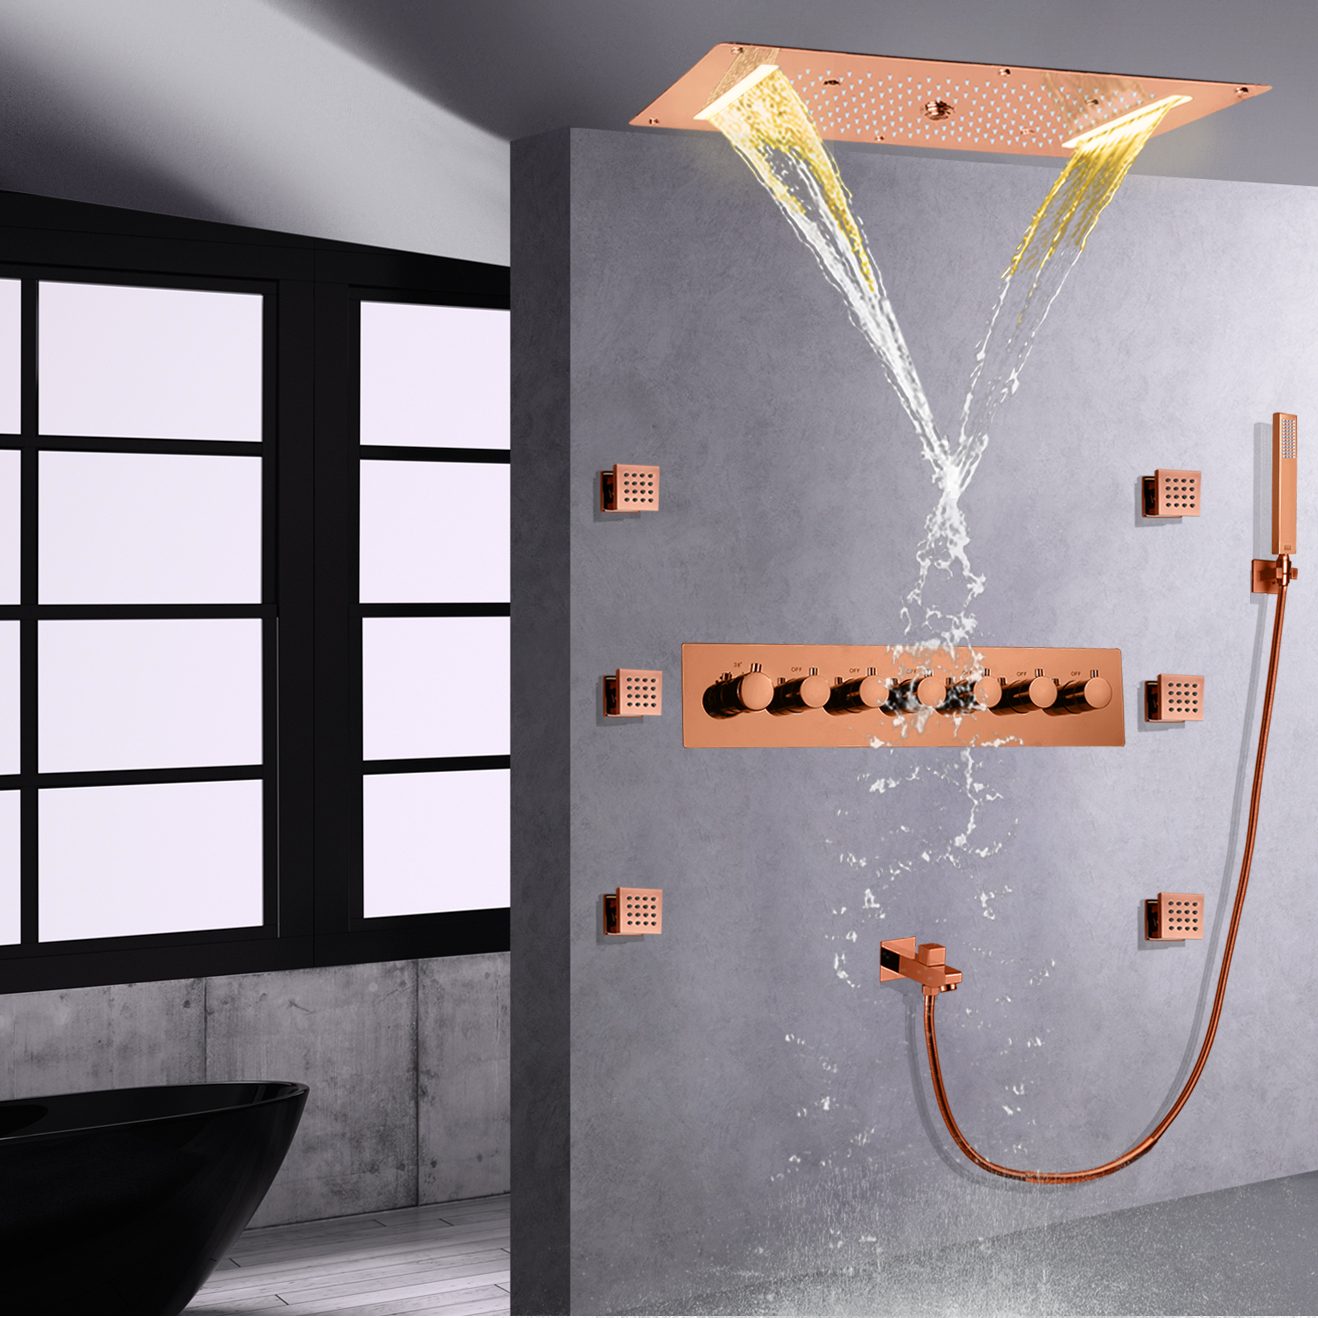 Rose Gold LED In Wall Mounted Rain Concealed Shower Set Bathroom Thermostatic Waterfall Spa